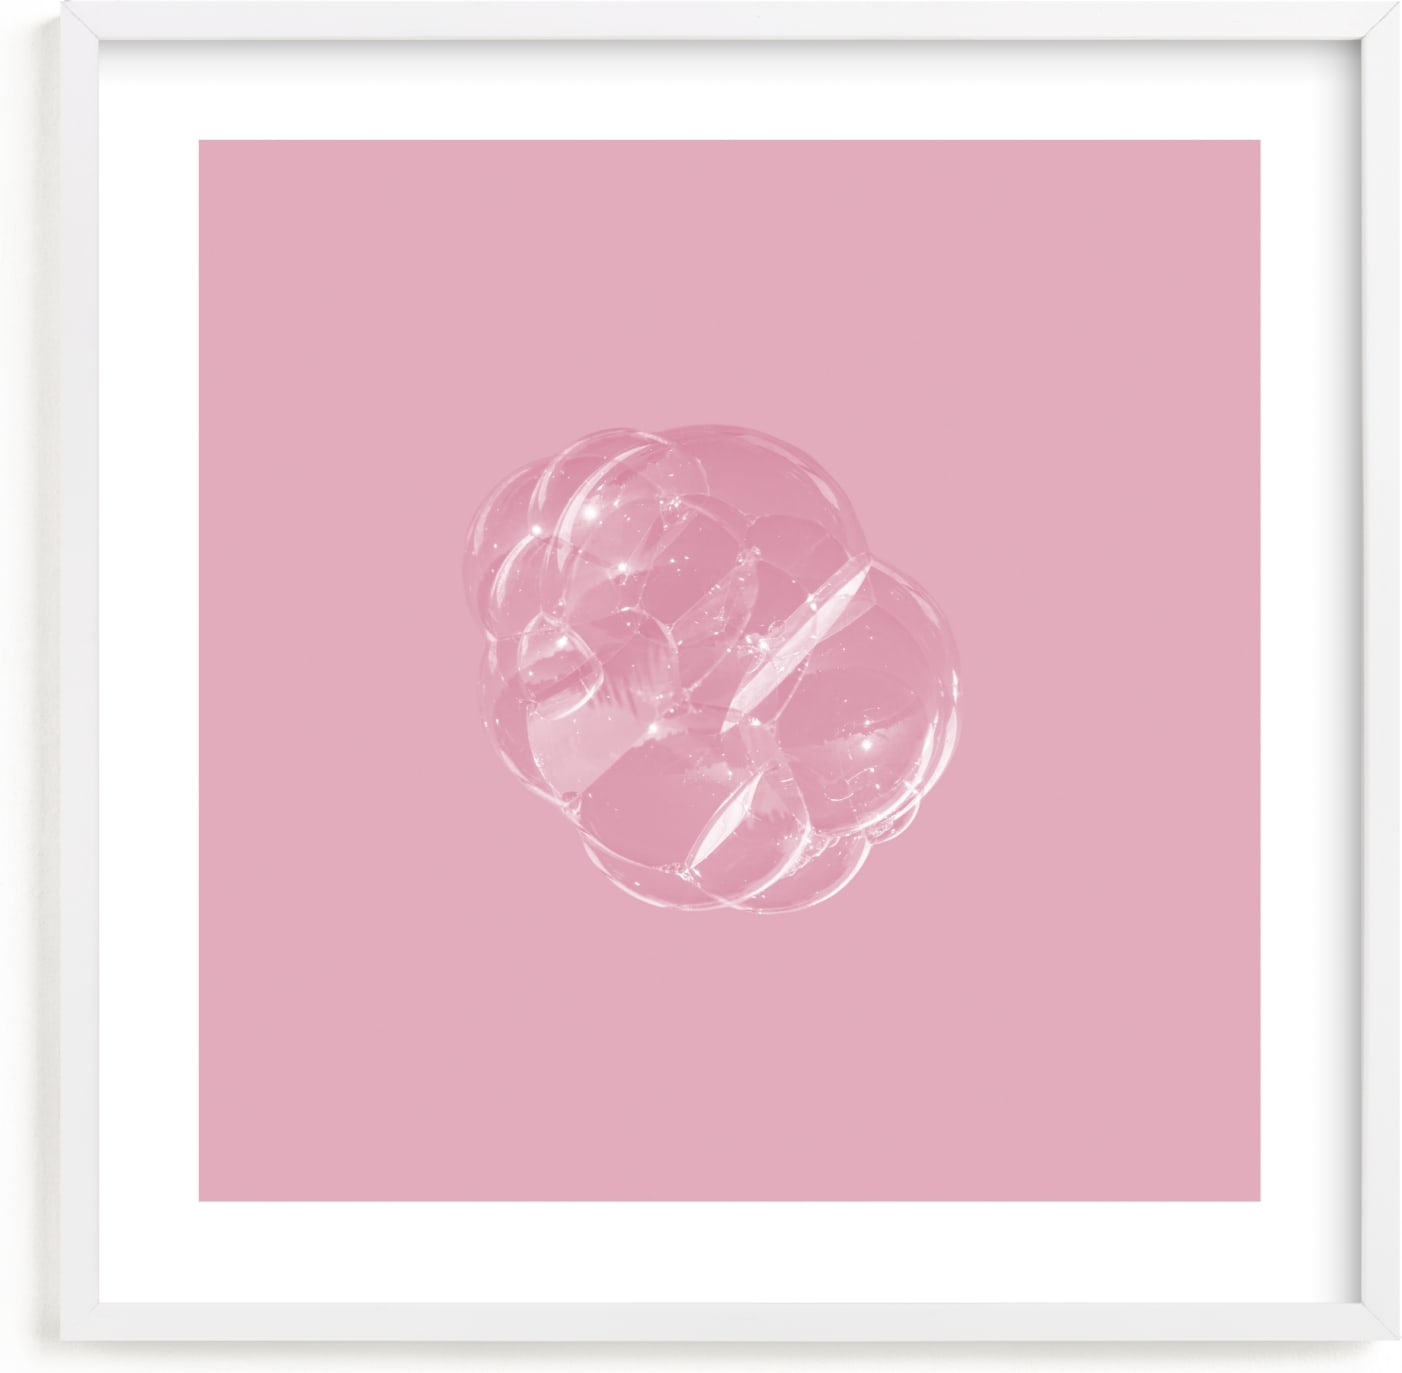 This is a pink kids wall art by Lynann Colligan called Sargasso.